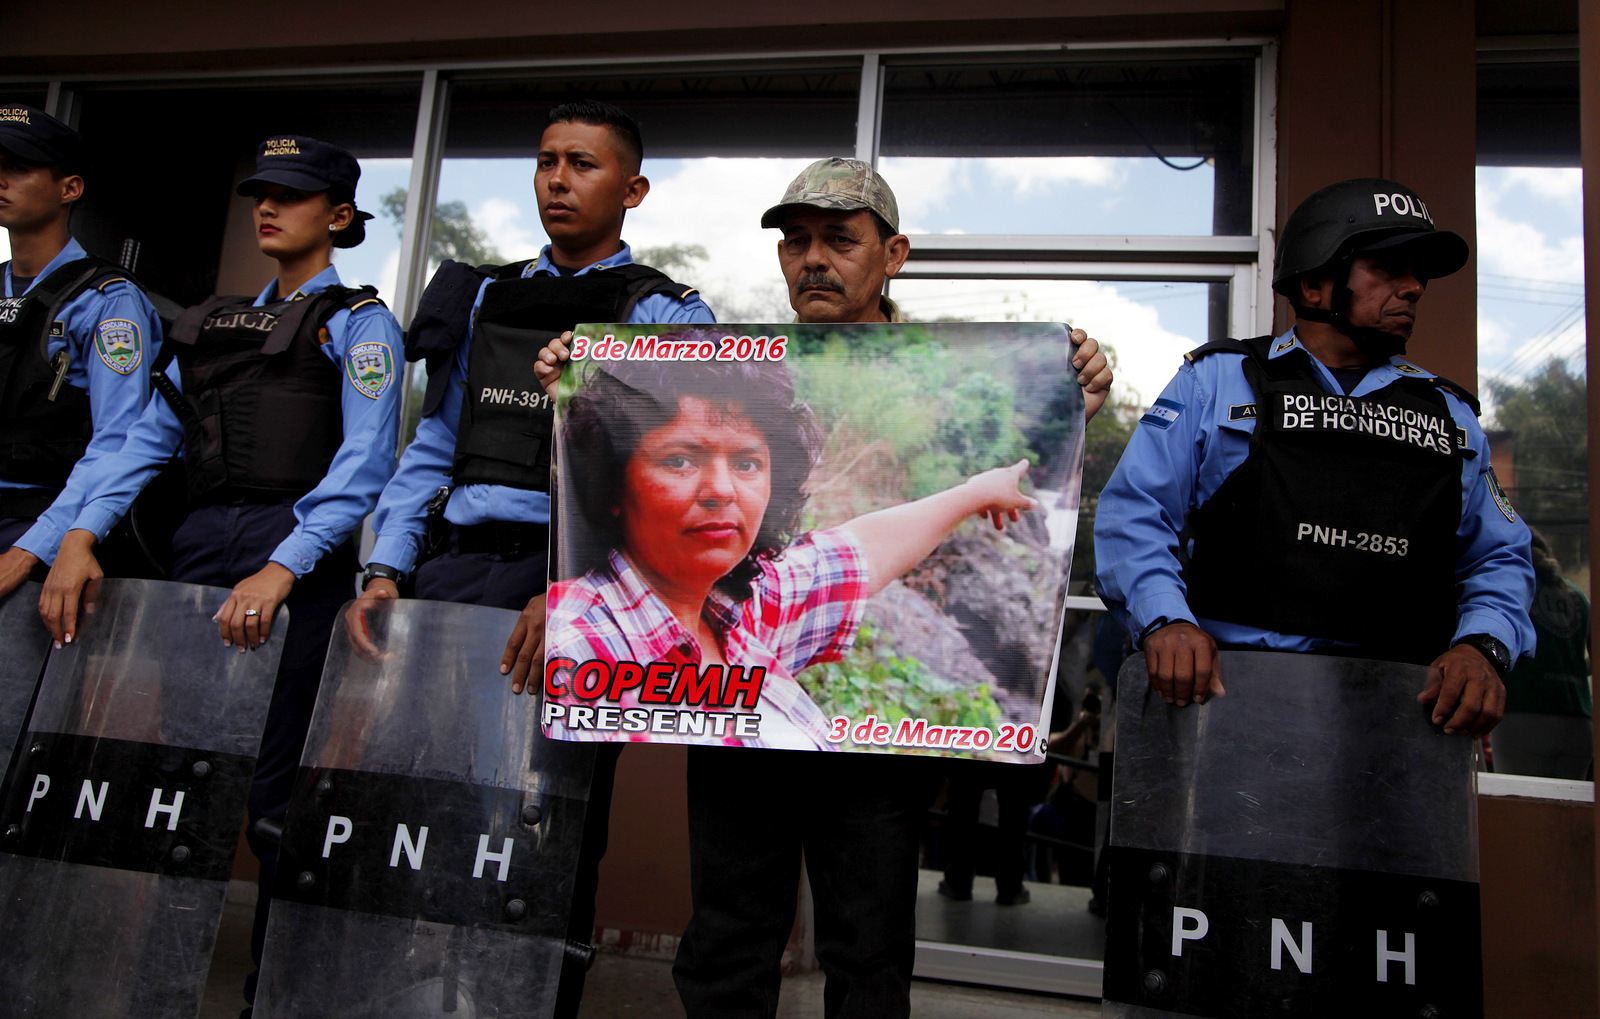 A man, flanked by police, holds a placard showing an image of slain environmental activist and Goldman Environmental Prize winner Berta Caceres, as part of a protest demanding justice for her murder, outside the Prosector's Office in Tegucigalpa, Honduras, March 2, 2018. (AP/Fernando Antonio)